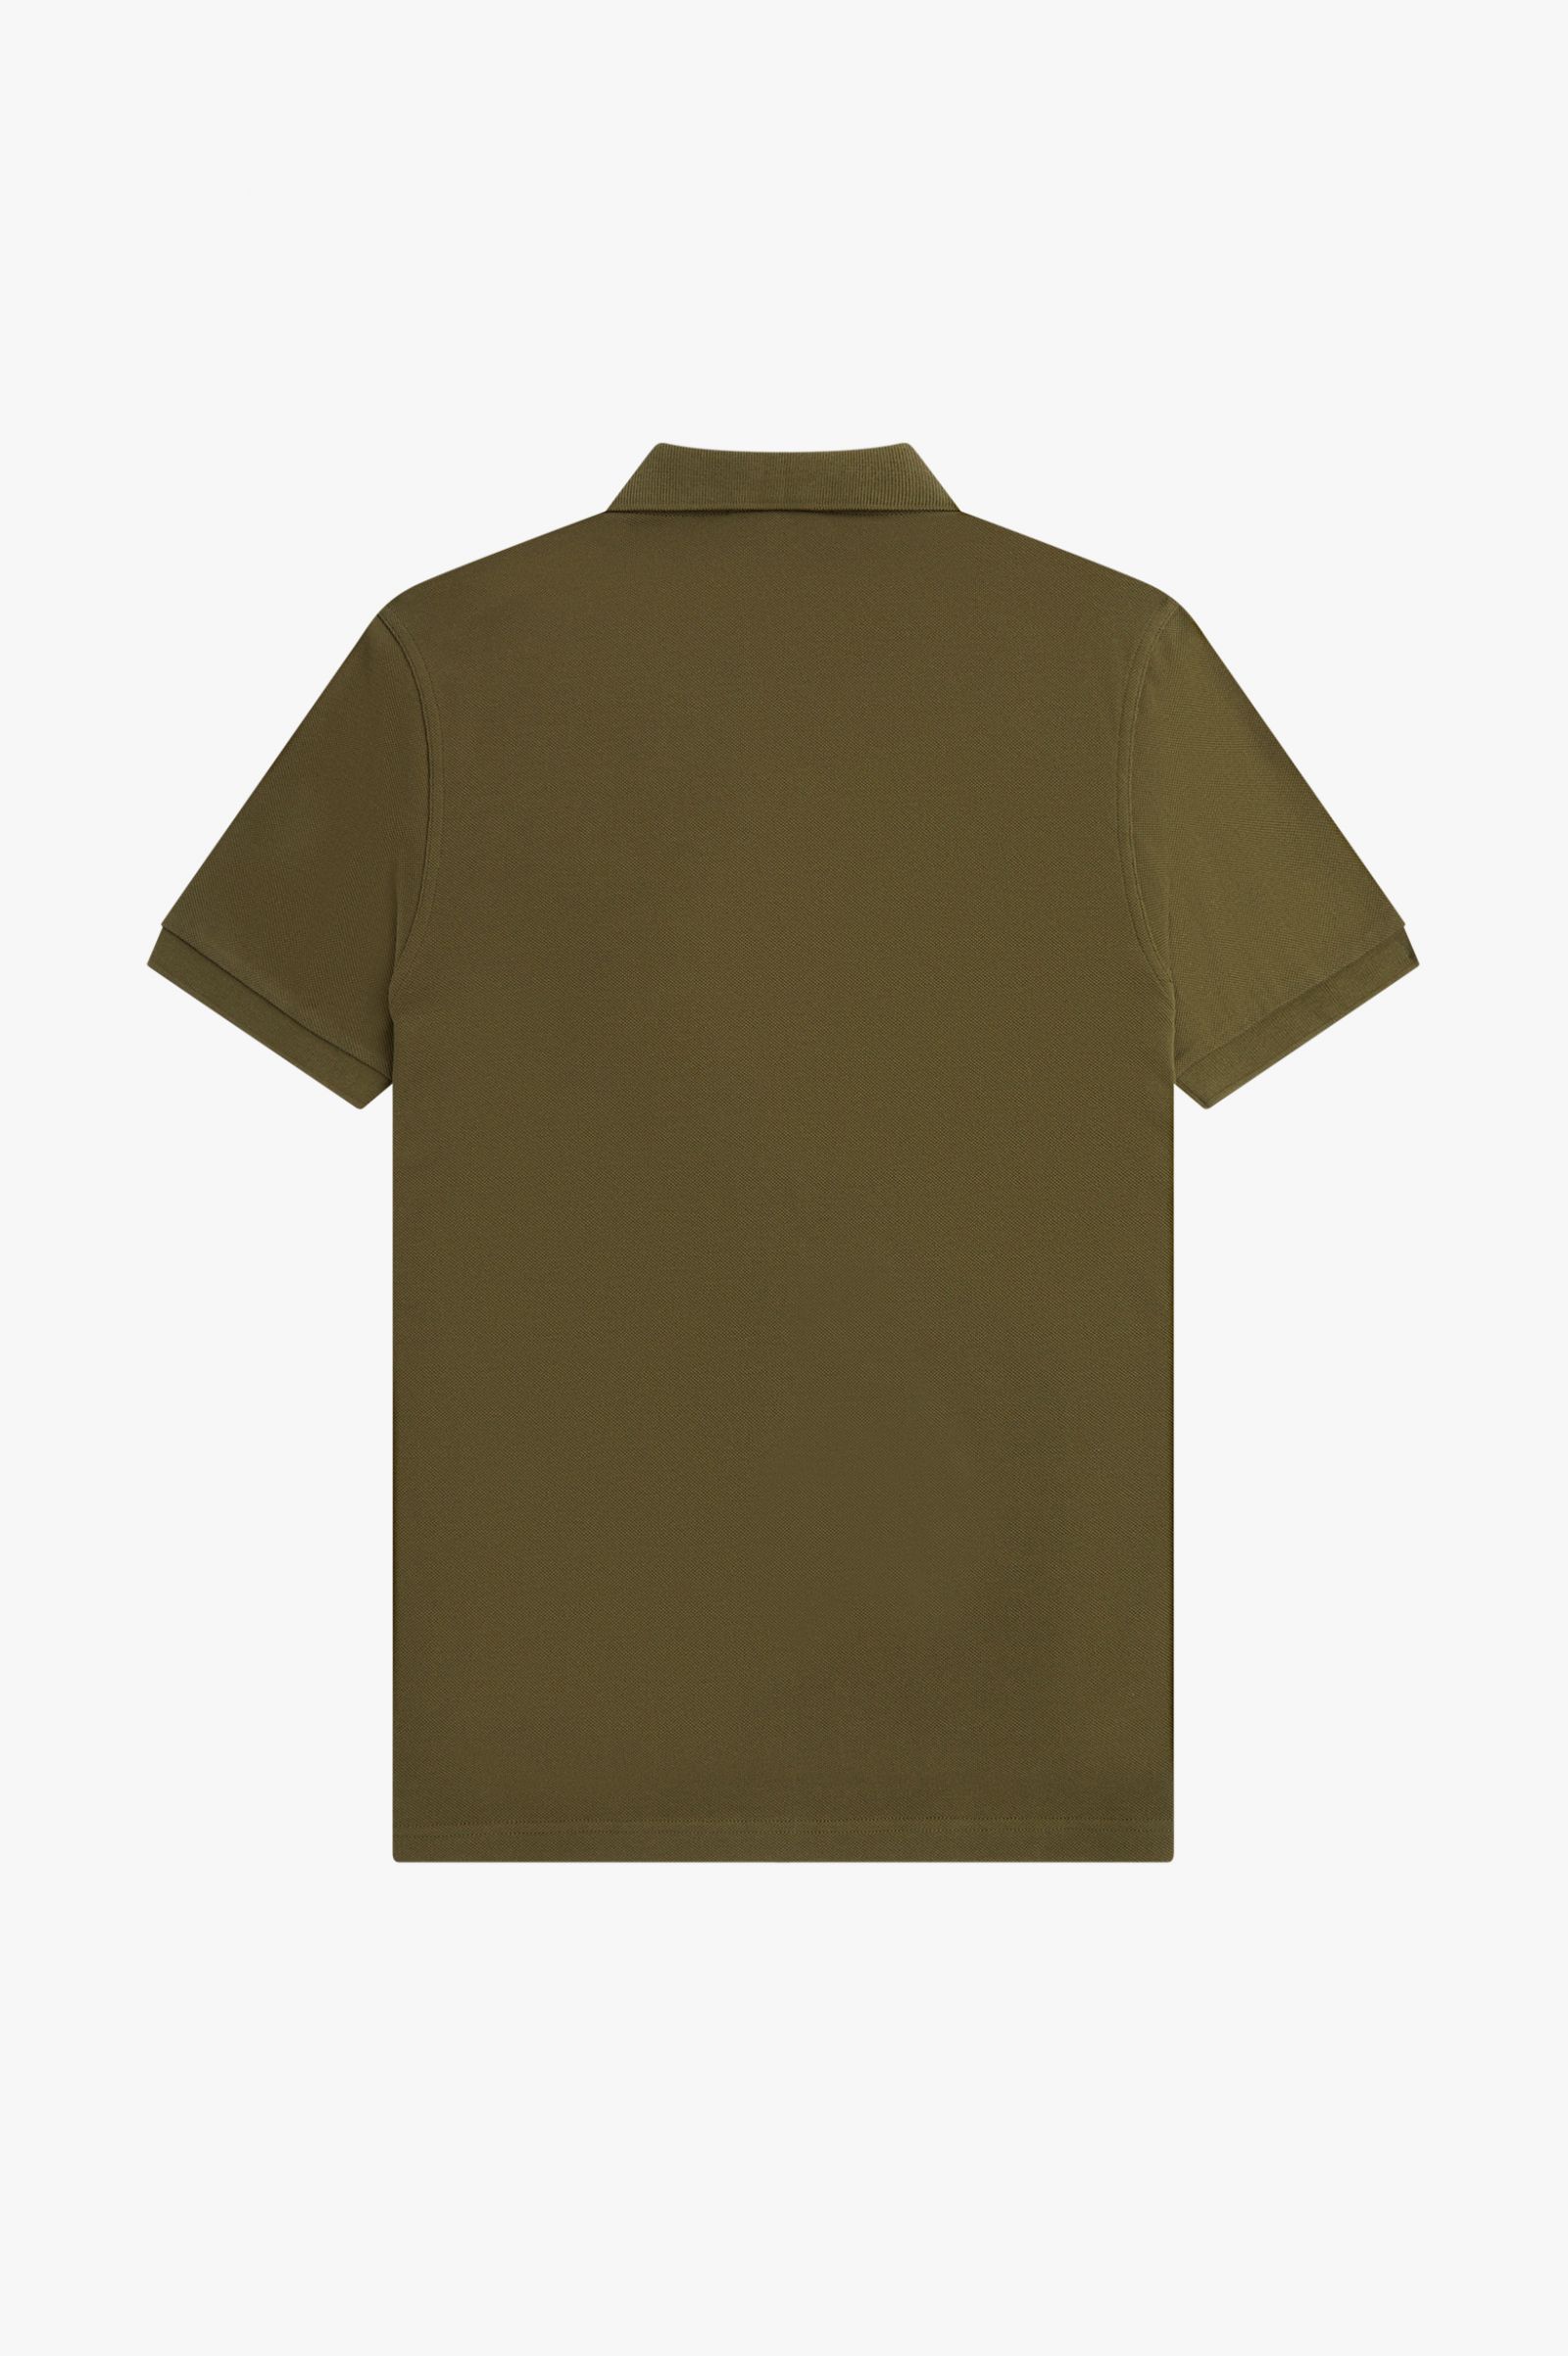 Fred Perry - The Fred Perry Shirt M6000